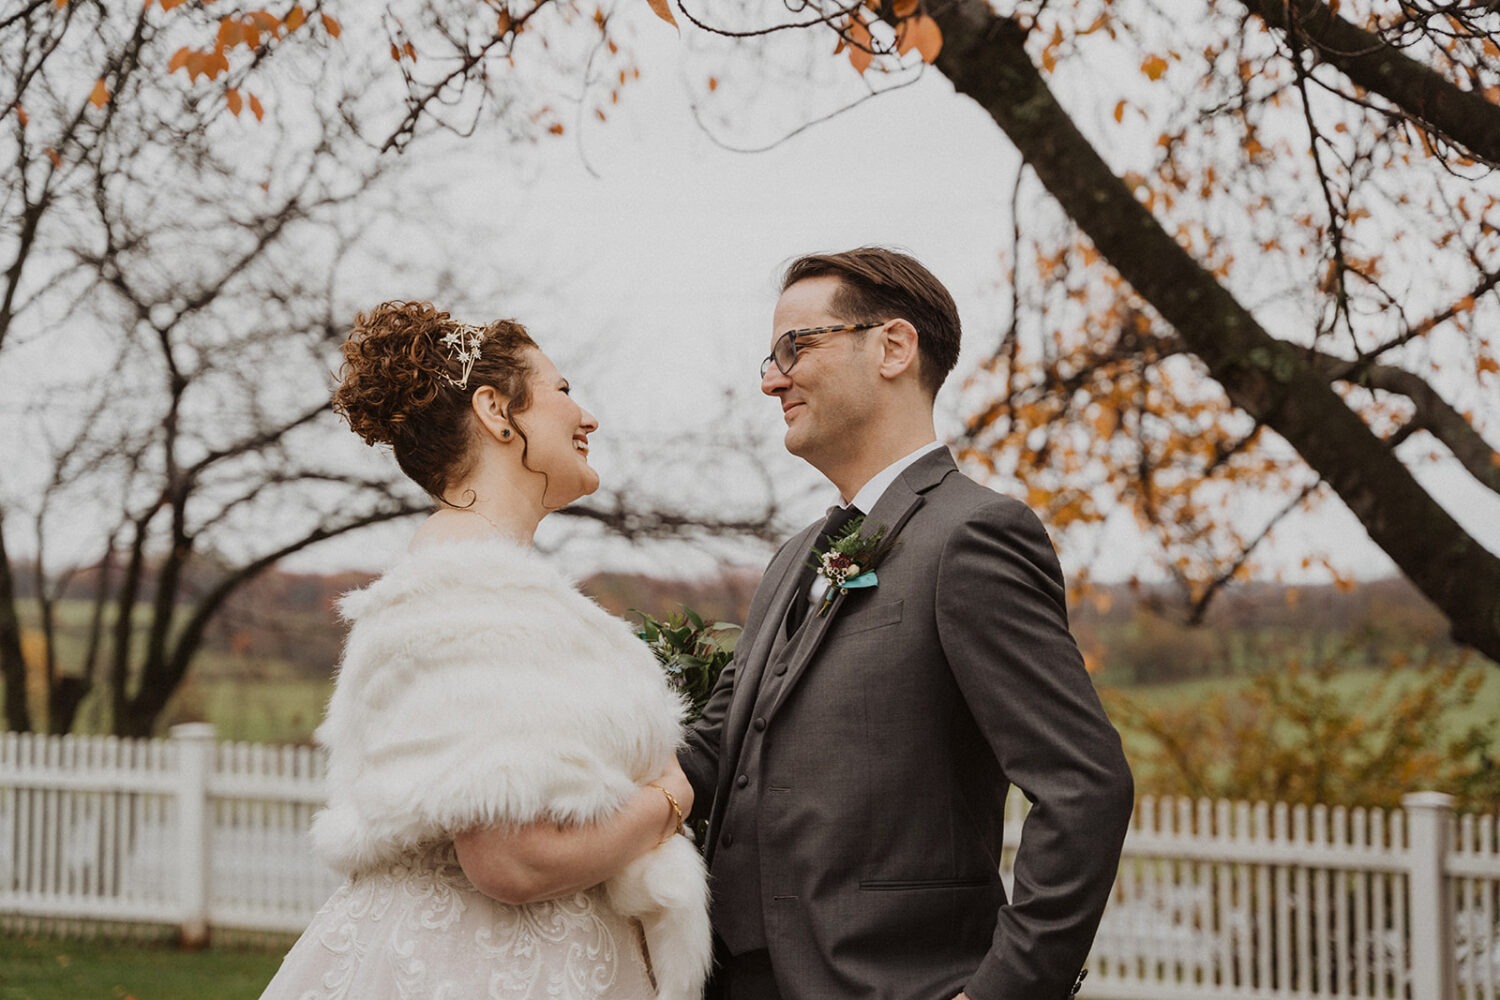 couple embraces under fall leaves on wedding day 